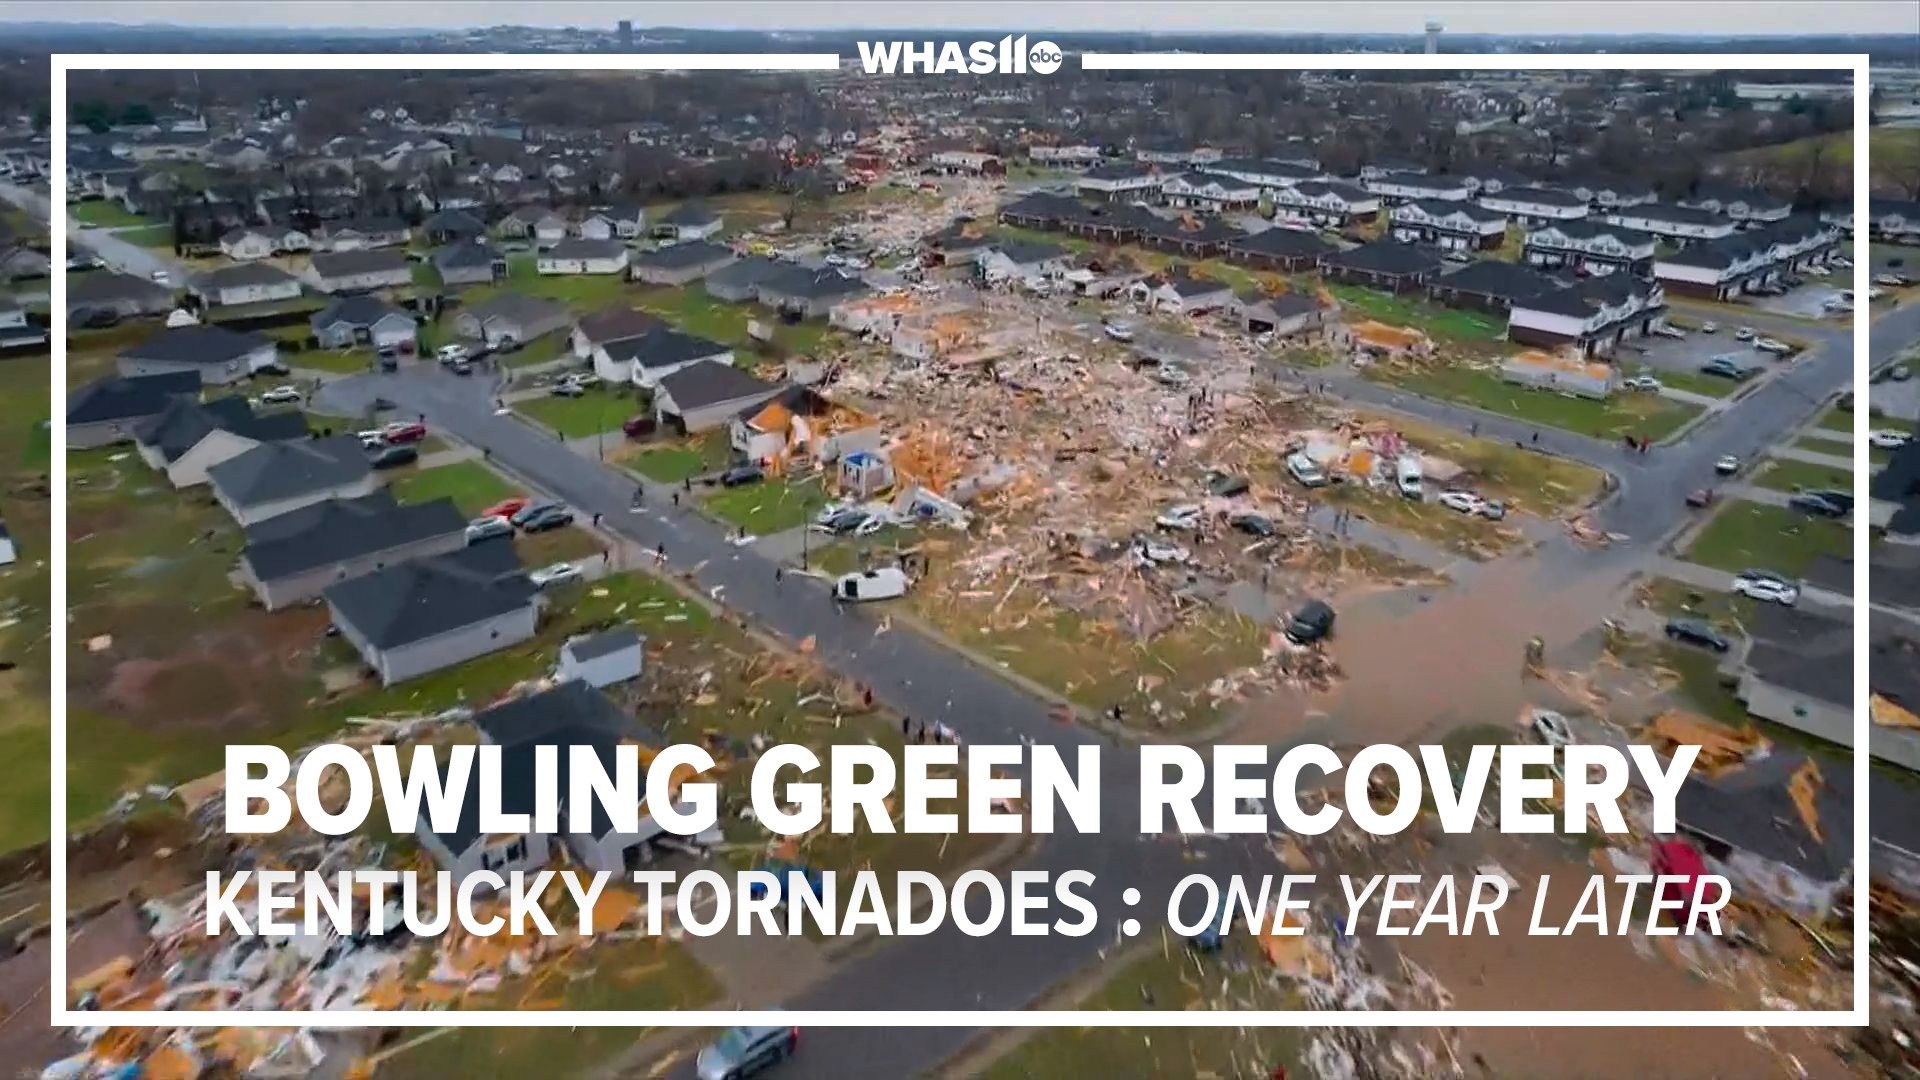 WHAS11 shows progress made in Bowling Green neighborhoods, and the lasting impact the storm had on the community.